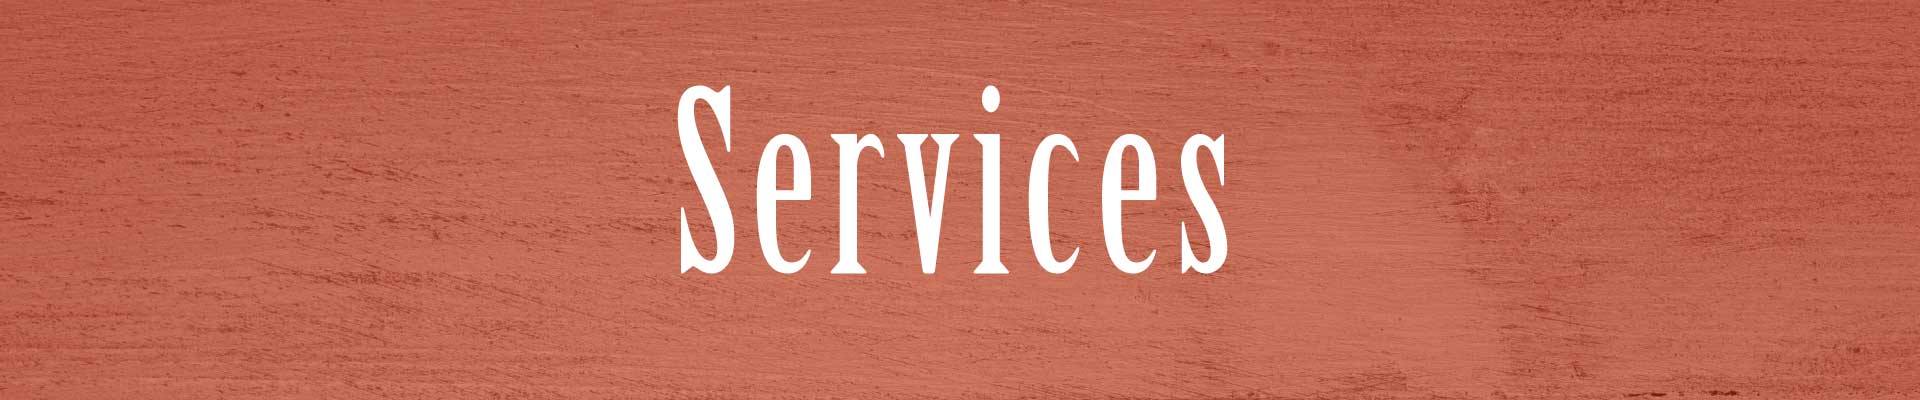 Services page header